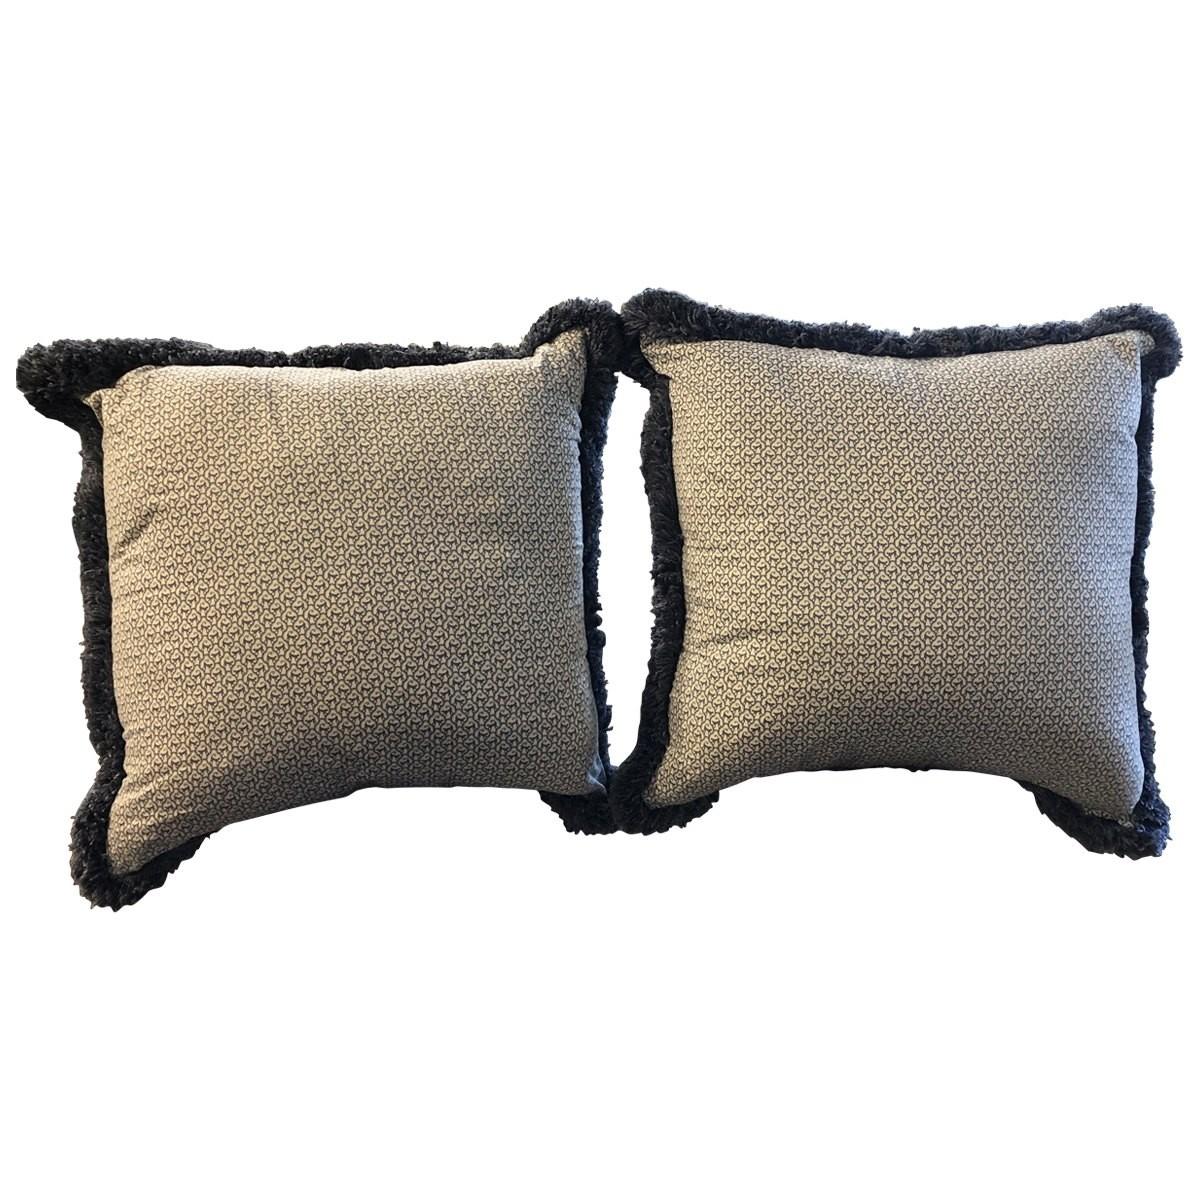 These oversized pillows are elegant and charming. These down-filled zippered pillows feature a yellow background with blue and white print with monkey pattern on back, mixing antiqued refinery and whimsical aesthetics. These are great accent pieces